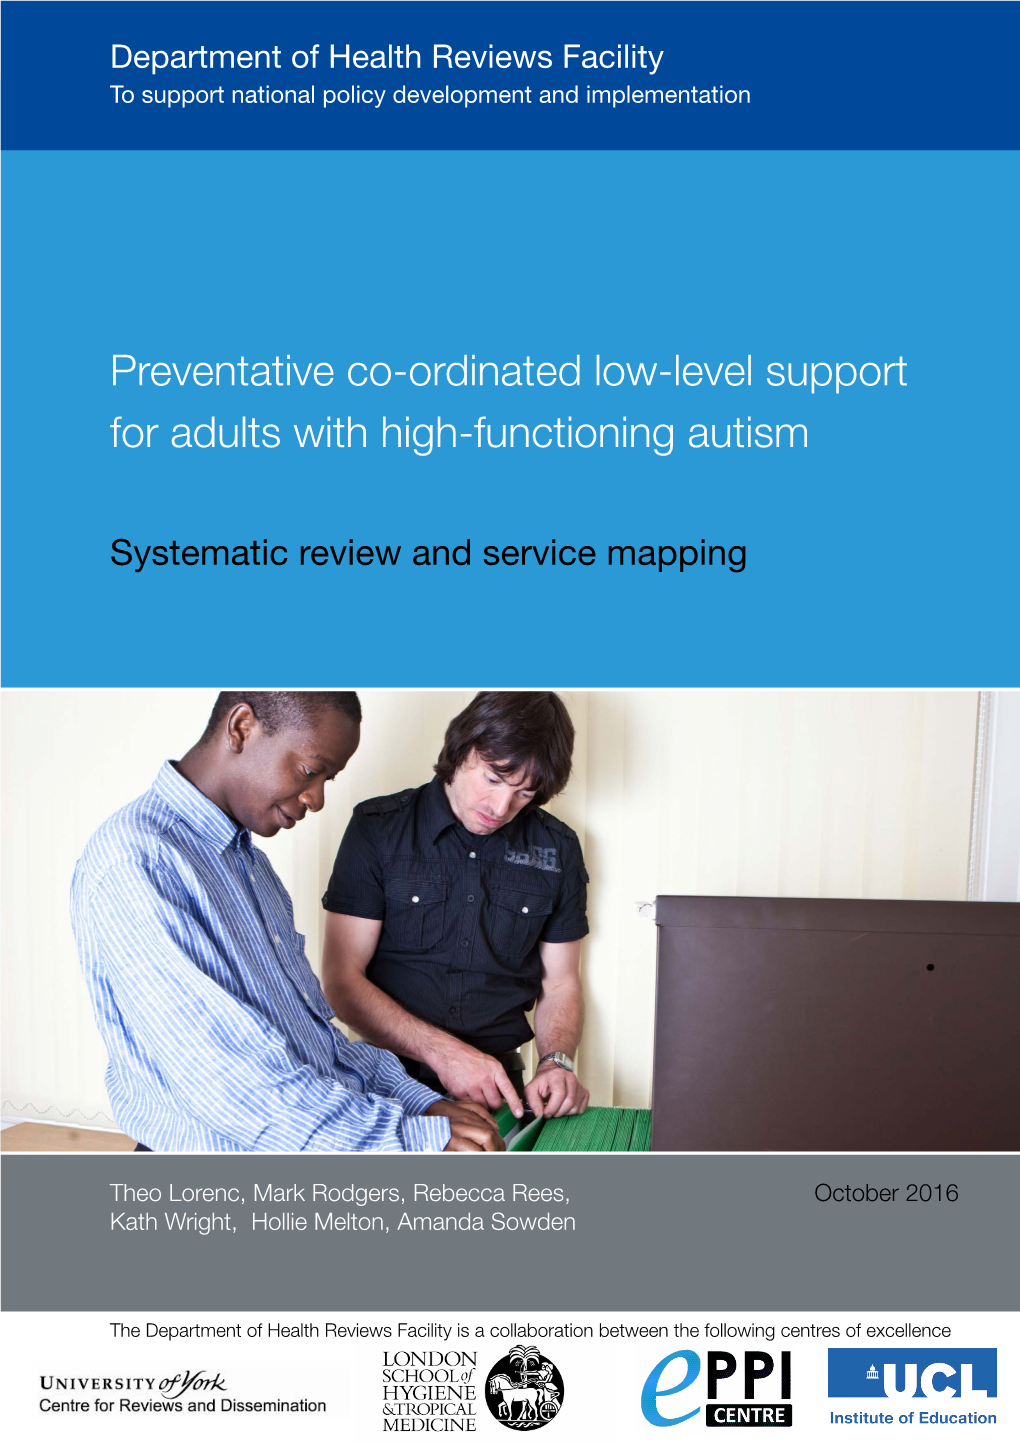 Preventative Co-Ordinated Low-Level Support for Adults with High-Functioning Autism